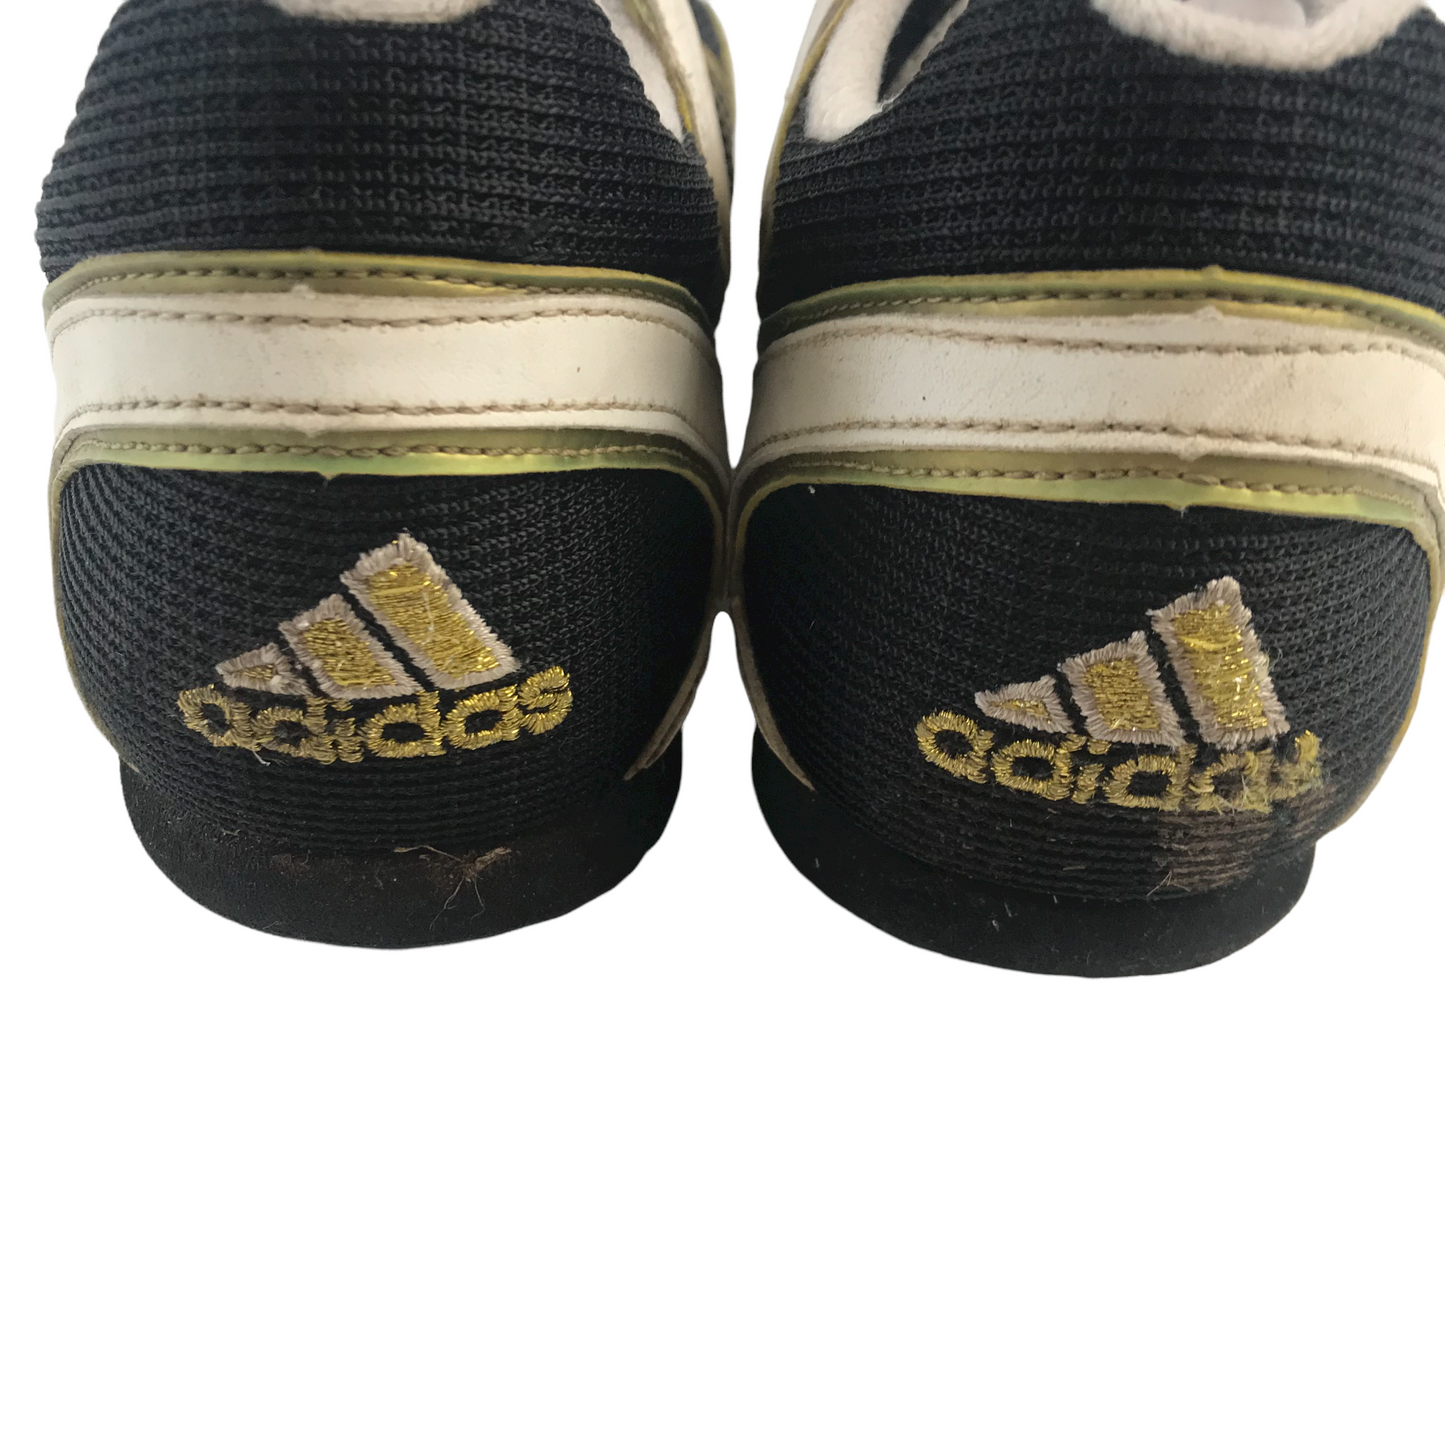 Adidas Black Gold and White Track and Field Spikes Trainers Shoe Size 9.5